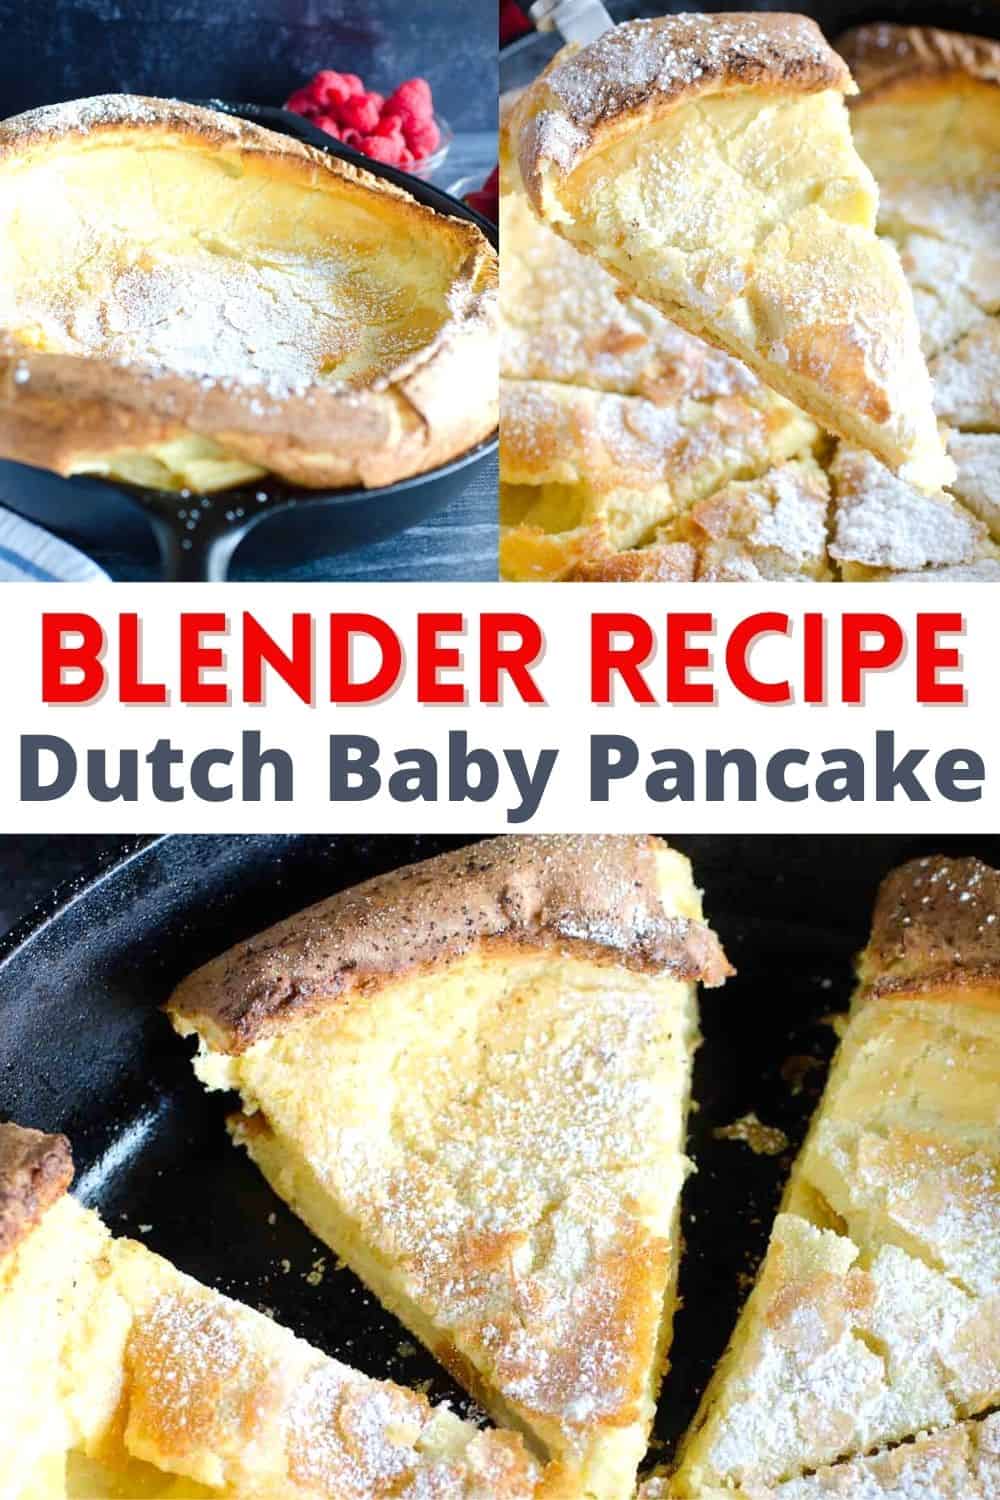 Dutch Baby is a hybrid of a pancake, a popover, and a crepe baked in the oven until puffy. Sometimes called a German Pancake, the batter includes milk, flour, eggs, sugar and butter for an easy breakfast!